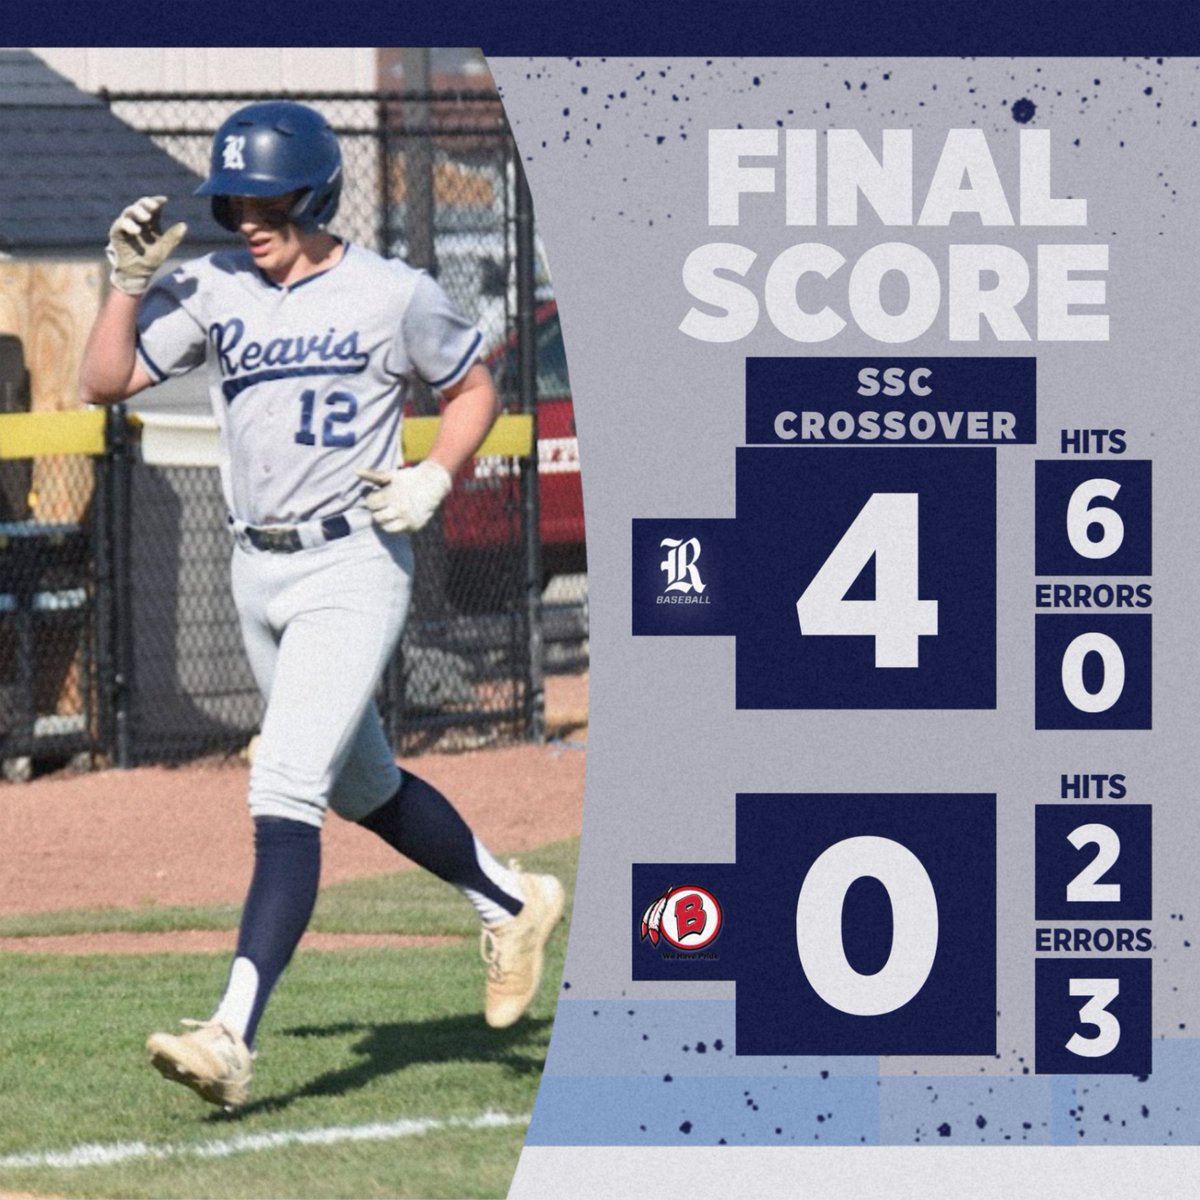 Rams (15-3,8-1) earn the victory over Bremen. Liesen does it again with the bat (2-4 HR(5), 2B, 2RBI, 2R) and Gonzalez adds a 2-out RBI (1-3). Wielgos (2-3 R) Muraida picks up the win on the hill (4.1IP W, 2H, 3K) and Swierczynski (2.2IP, 2K) gets his 5th save of the season.